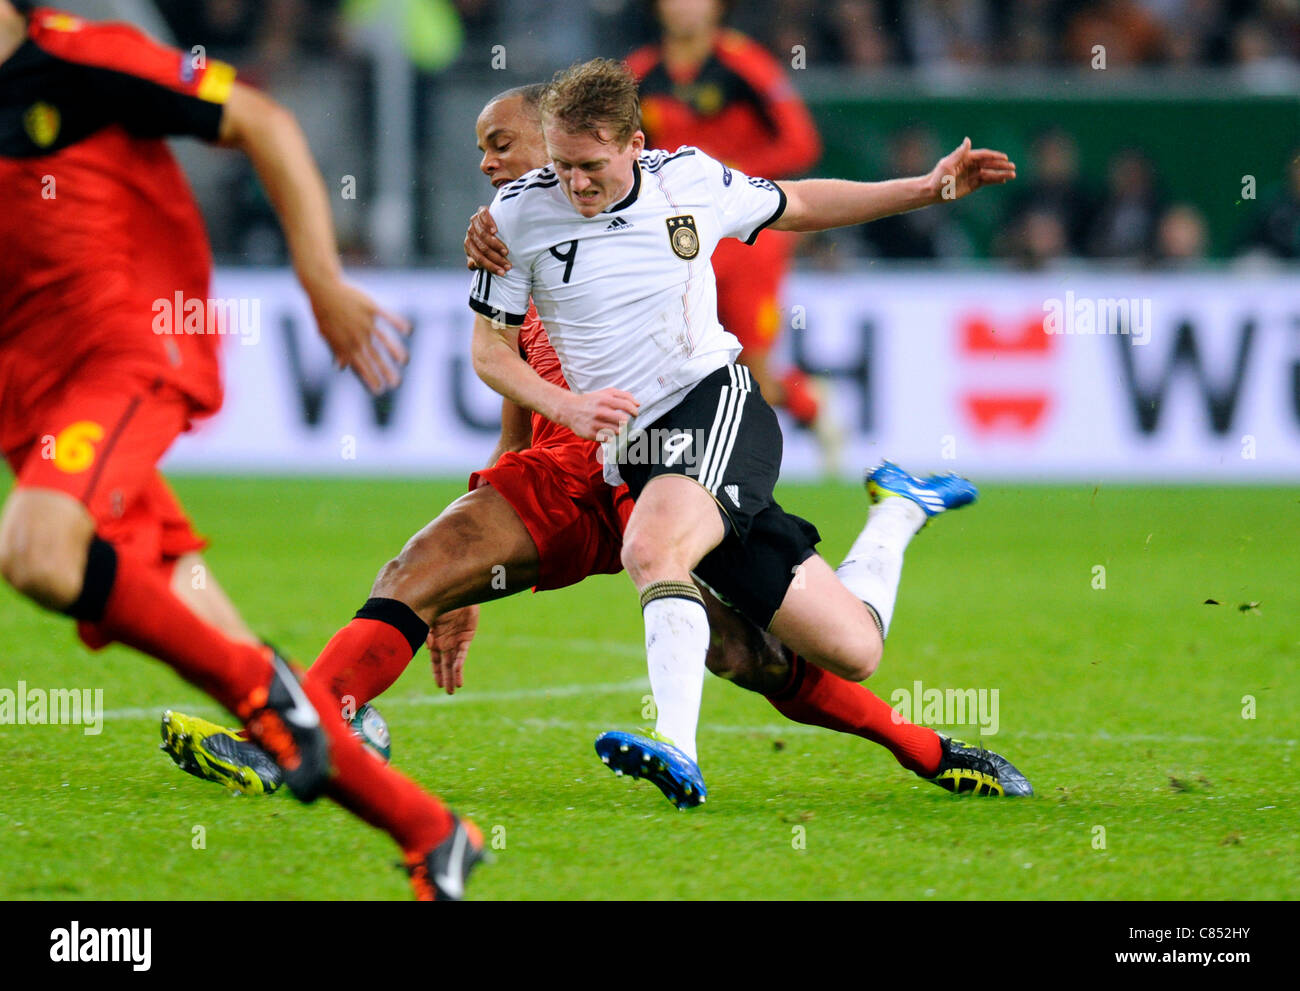 Qualification match for the European Football Championship in Poland and Ukraine 2012; Germany vs Belgium 3:1, at the Esprit Arena in Duesseldorf, Germany: Andre Schürrle, Schuerrle (Germany, Bayer Leverkusen) vs Vincent Kompany (Belgium, Manchester City). Stock Photo